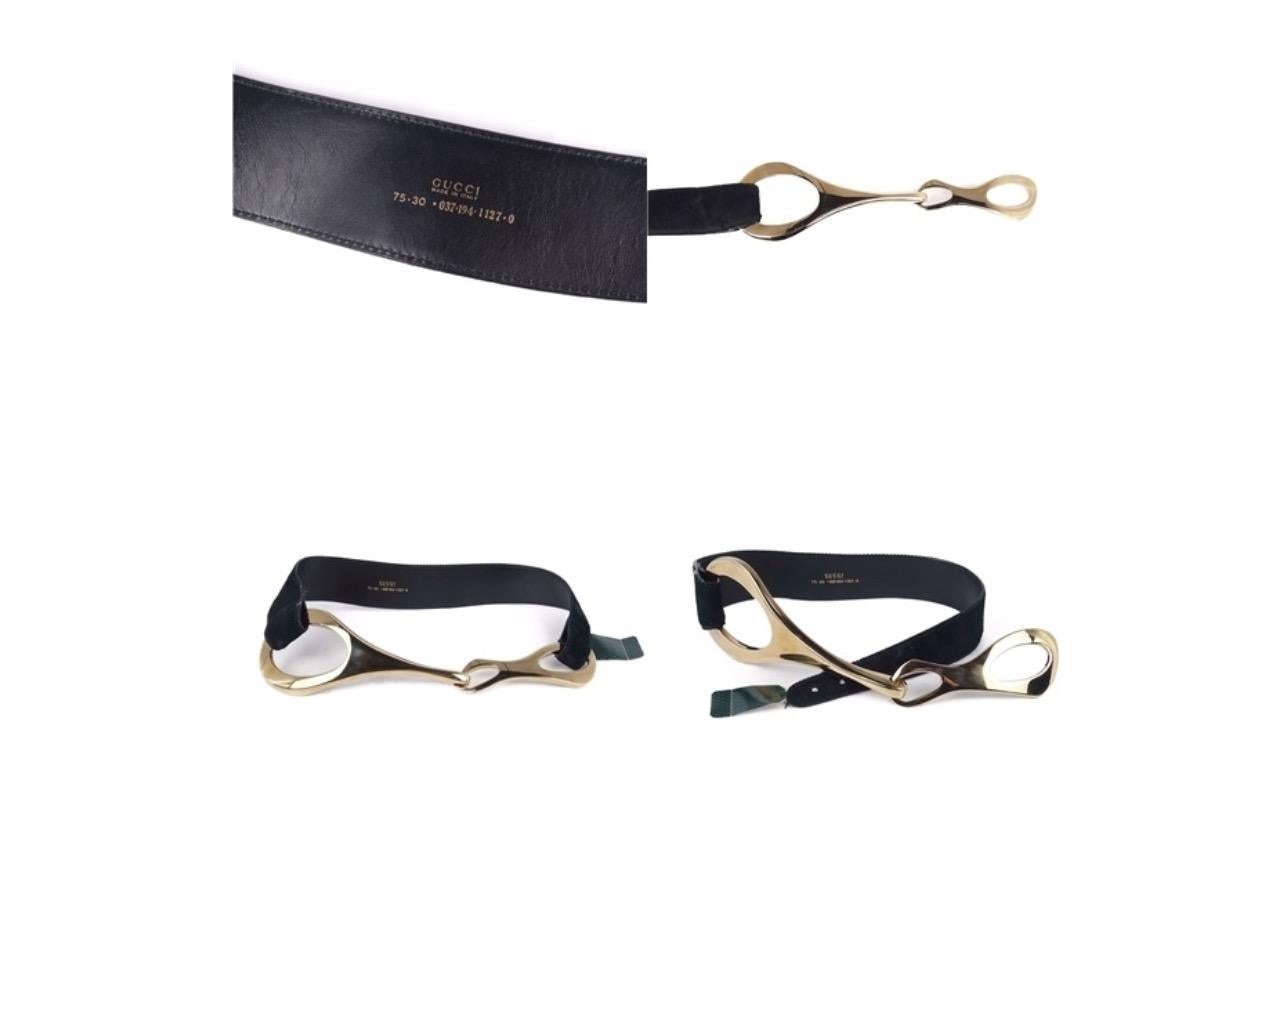 Gucci x Tom Ford Black Leather Gold Large Horsebit Wide Waist Belt In Excellent Condition For Sale In Chicago, IL